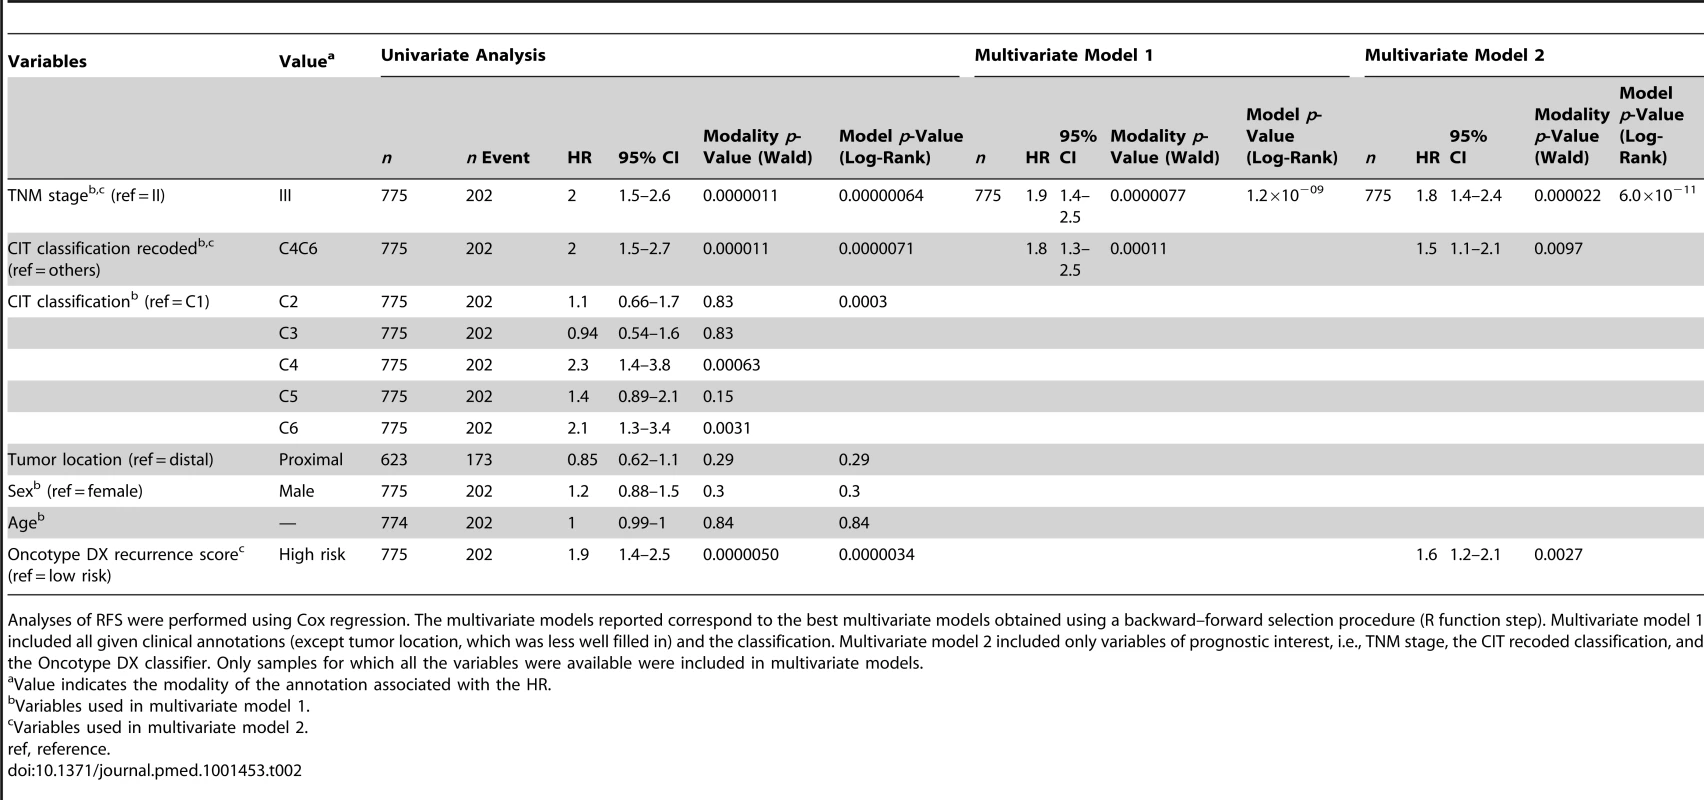 Univariate and multivariate analyses of relapse-free survival according to clinical annotations, the six-subtype classification, and the Oncotype DX prognostic classifier in the overall dataset.